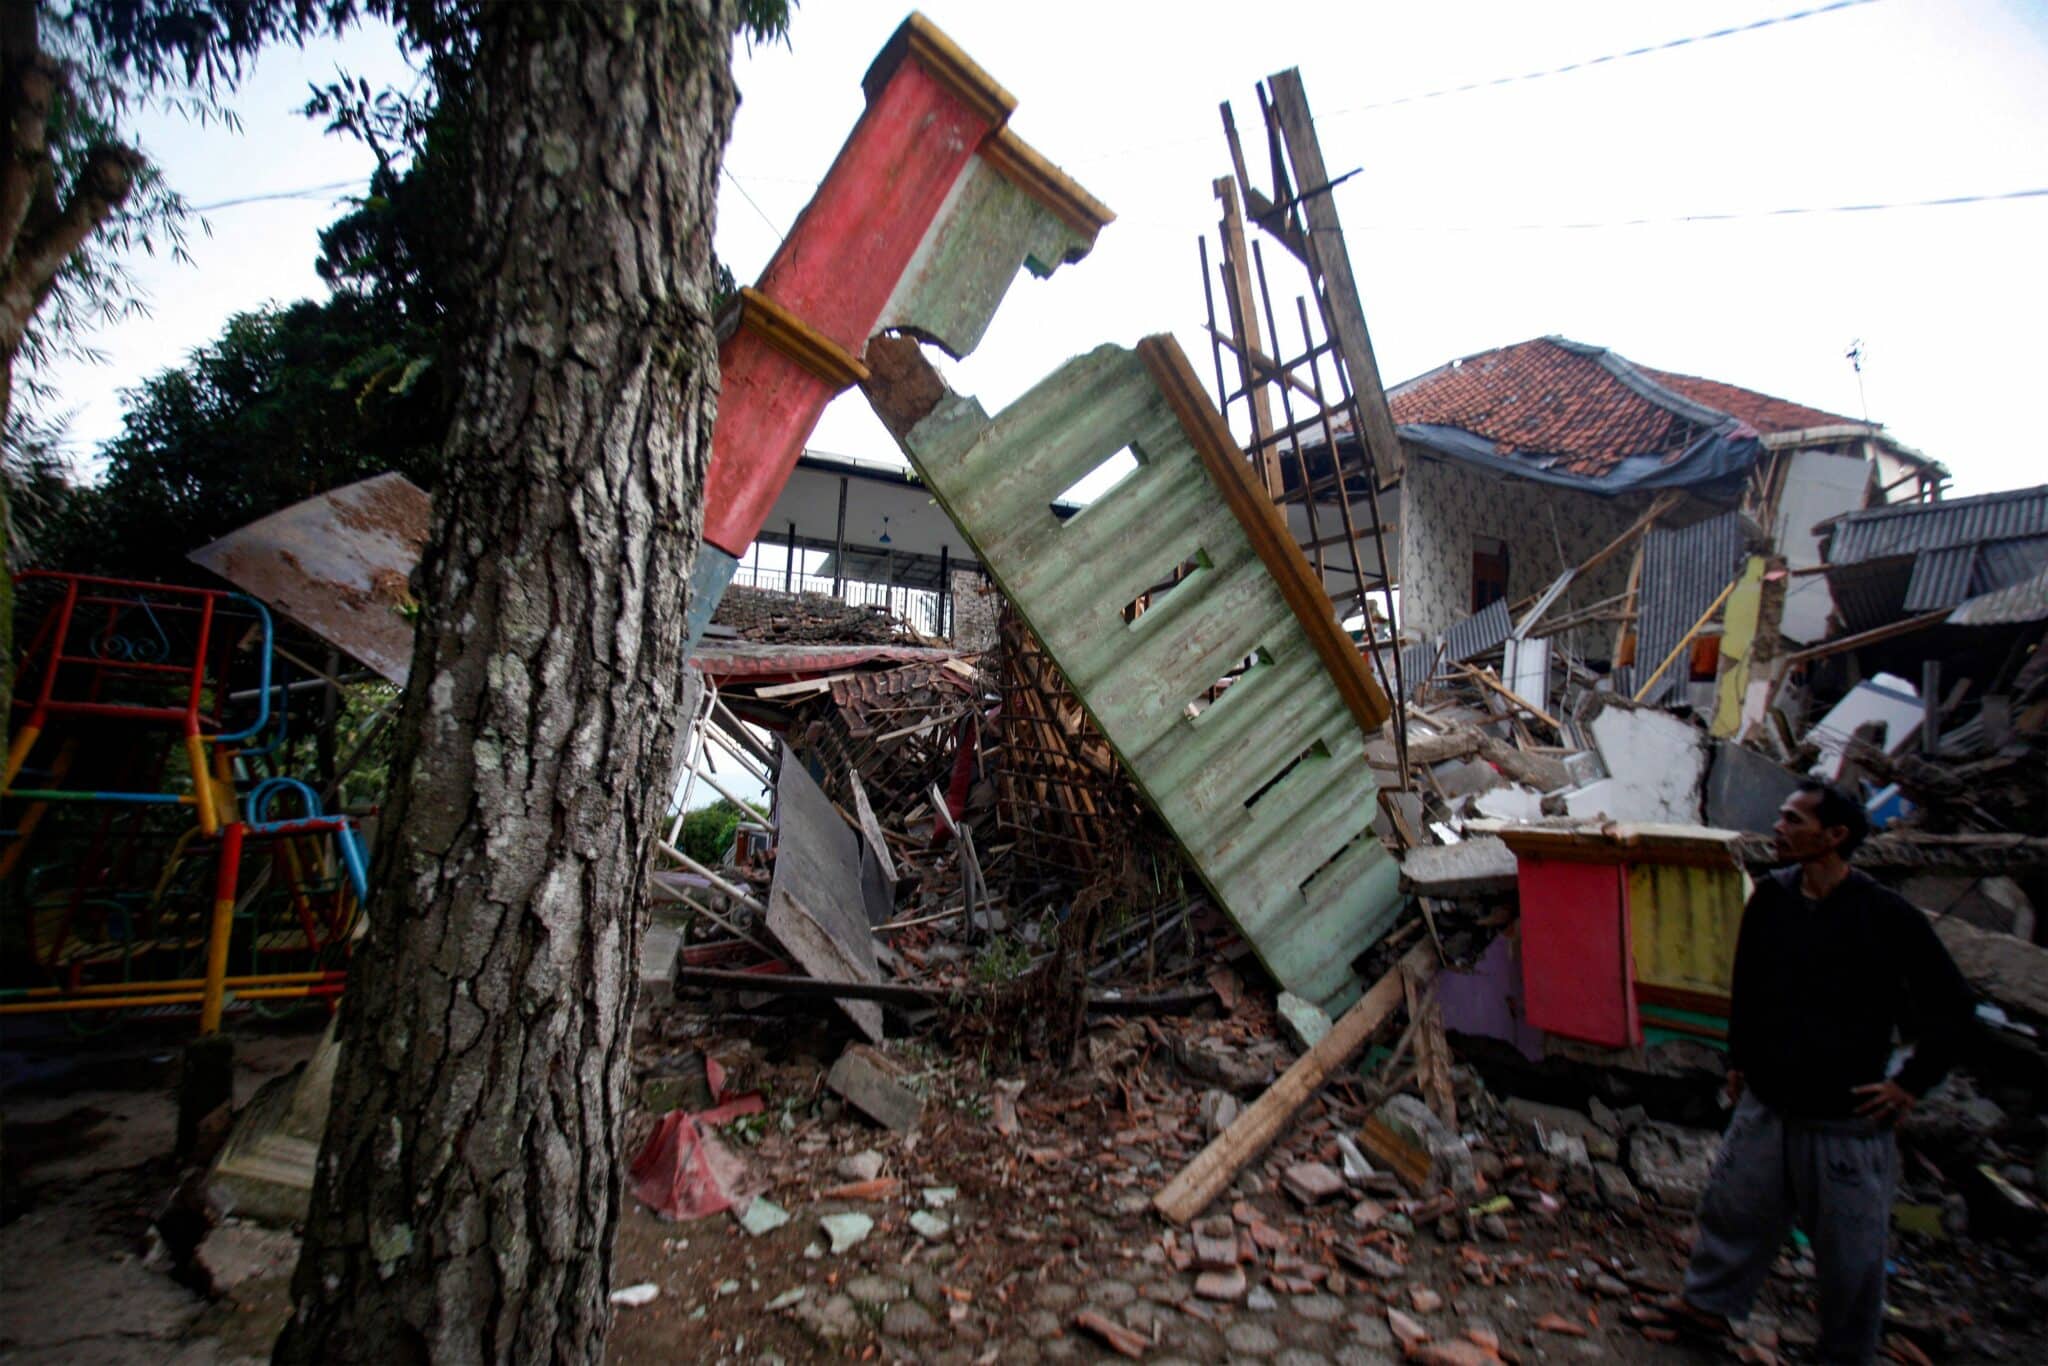 A man stands beside damaged houses following an earthquake in Cianjur on November 21, 2022. - At least 56 people were killed in an earthquake that rattled Indonesia's main island of Java on November 21, 2022, the governor of the worst-hit province said. (Photo by AFP) (Photo by STR/AFP via Getty Images)